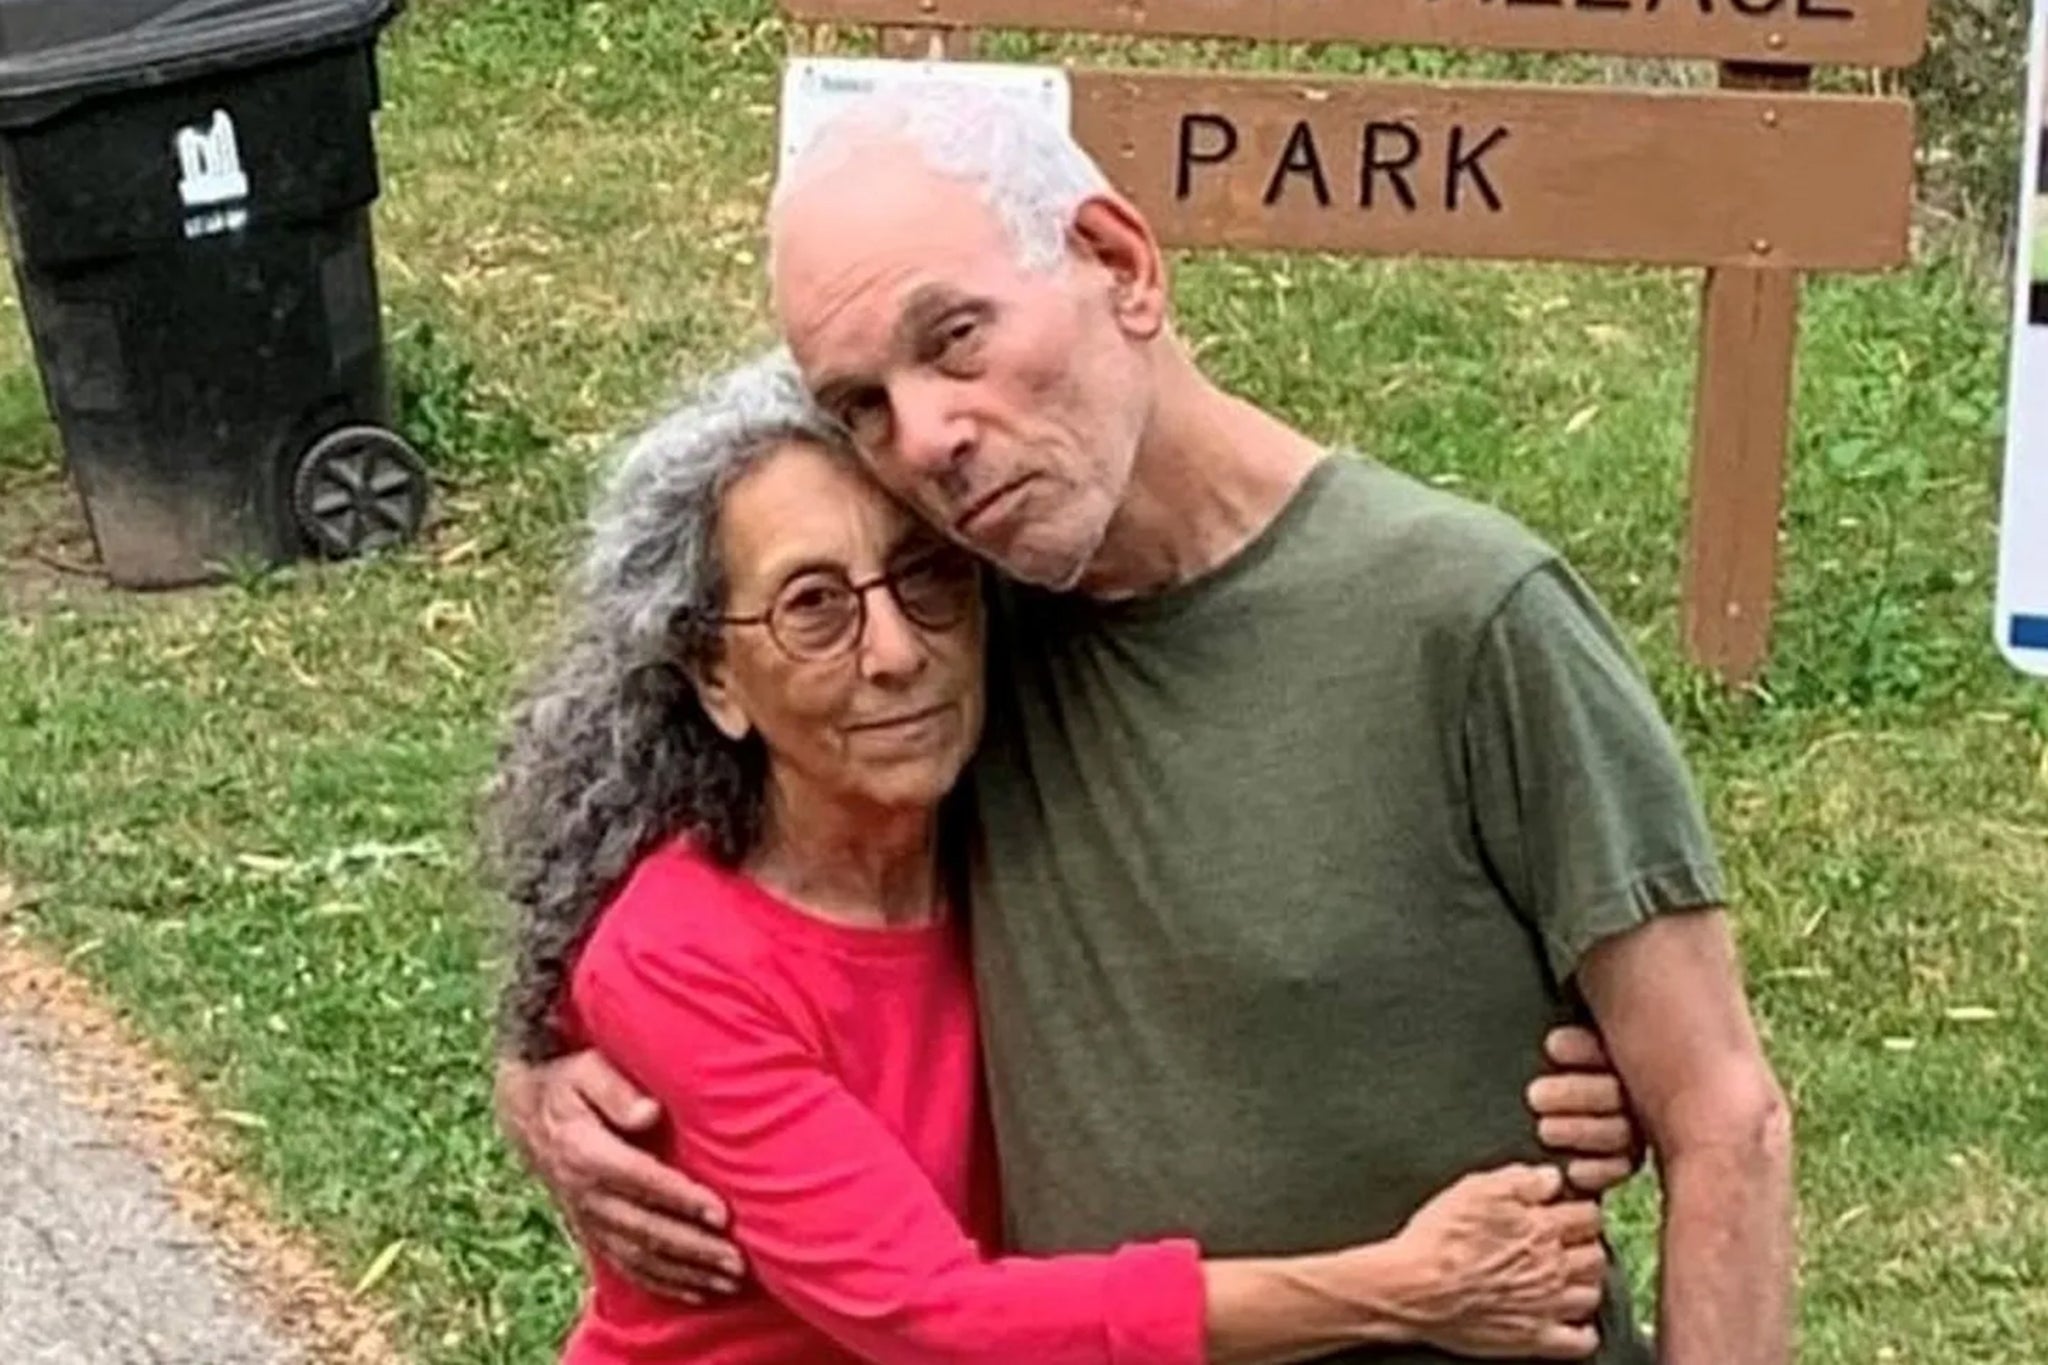 Gadi Haggai, a 73-year-old US and Israeli dual national, and his wife Judith Weinstein Haggai, 70, were both kidnapped on 7 October